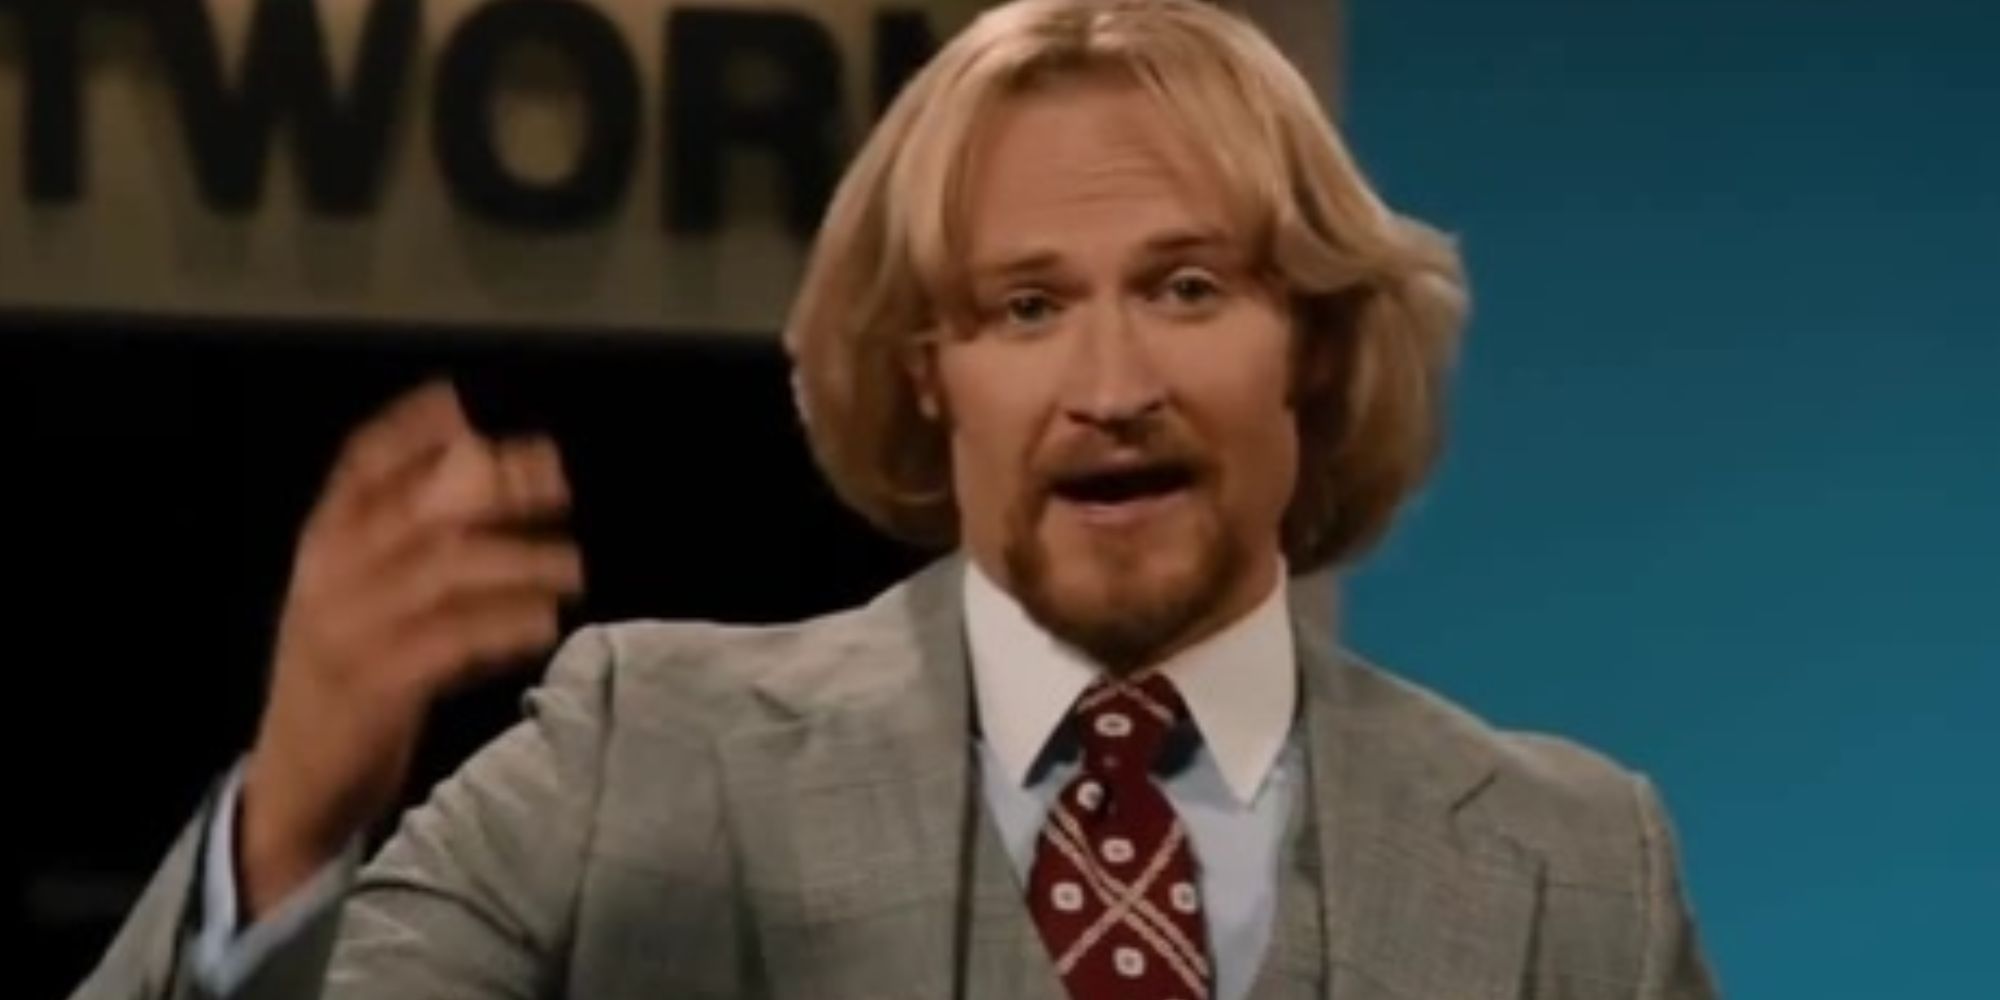 Josh Lawson gesticulating as Kench Allenby in Anchorman 2: The Legend Continues